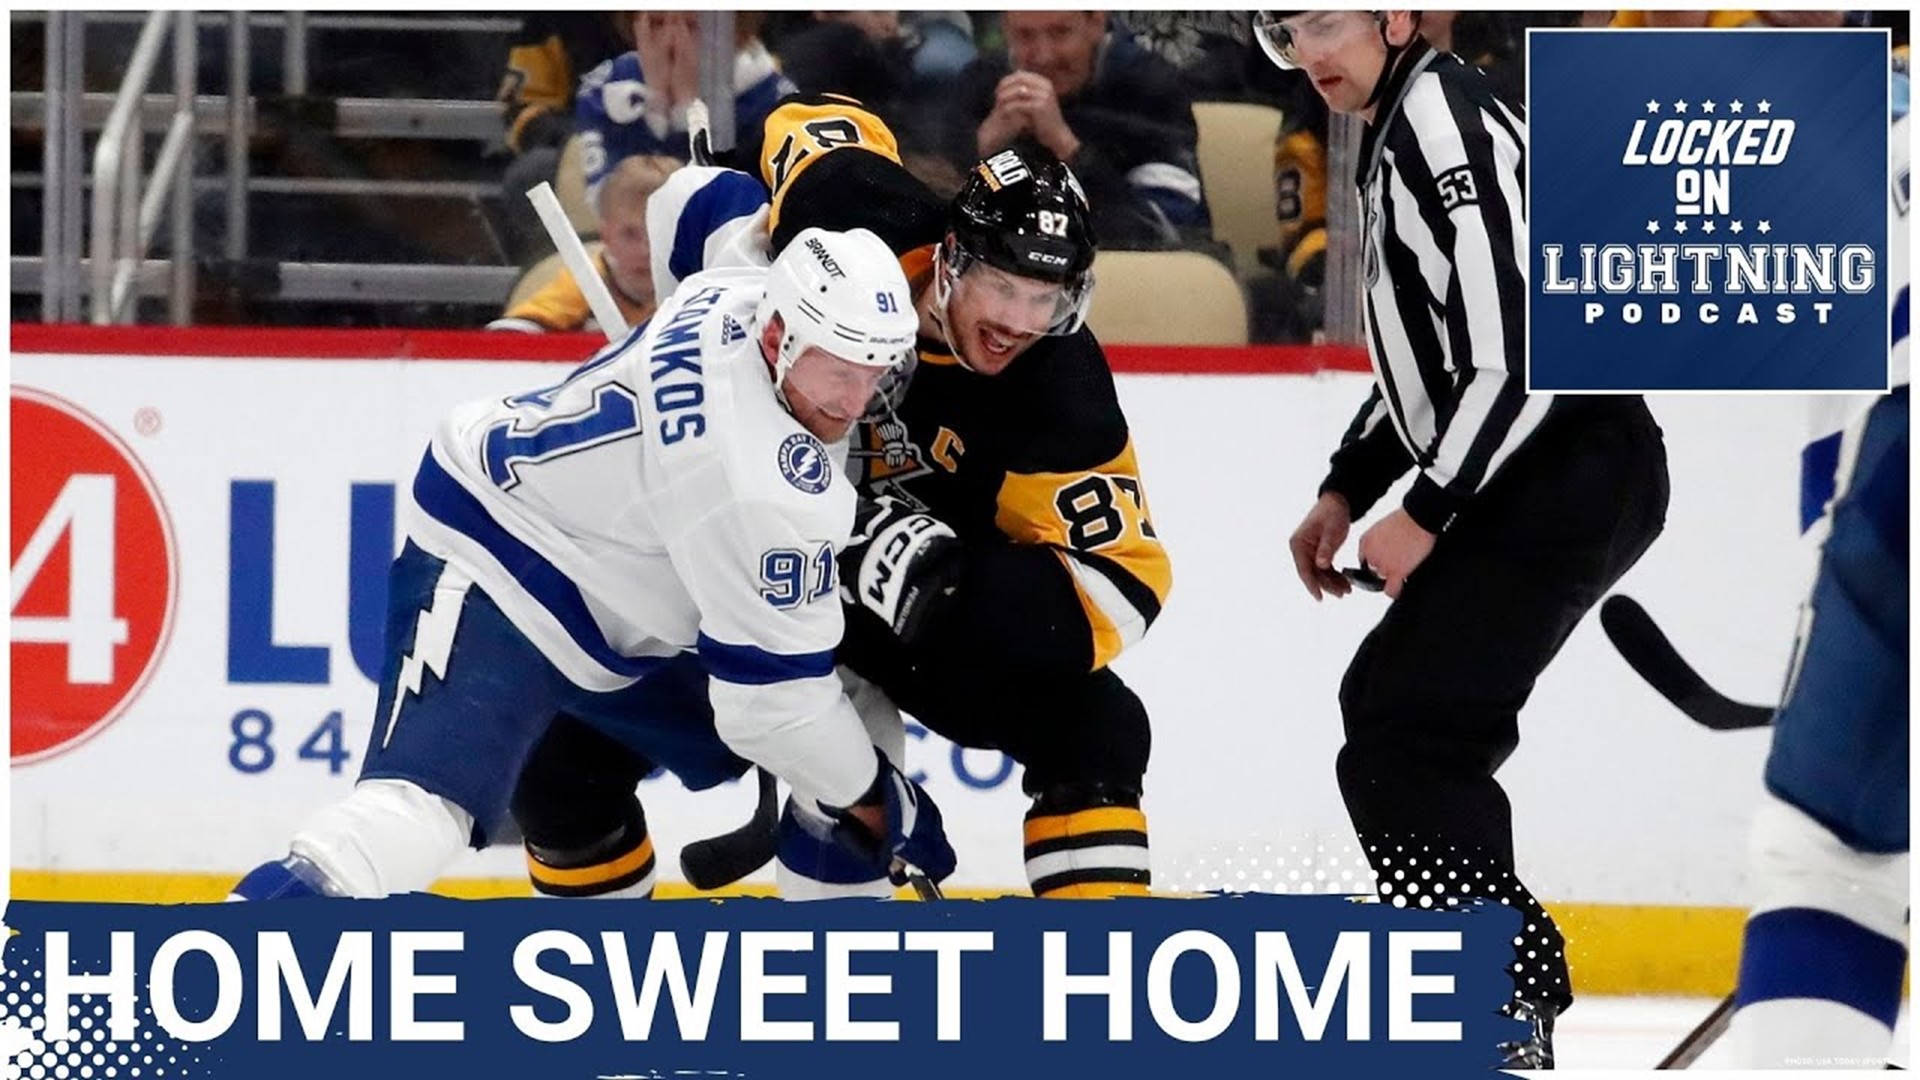 The Lightning came up just short on Saturday as they fell to the Penguins 5-4. Tampa received much help from Steven Stamkos